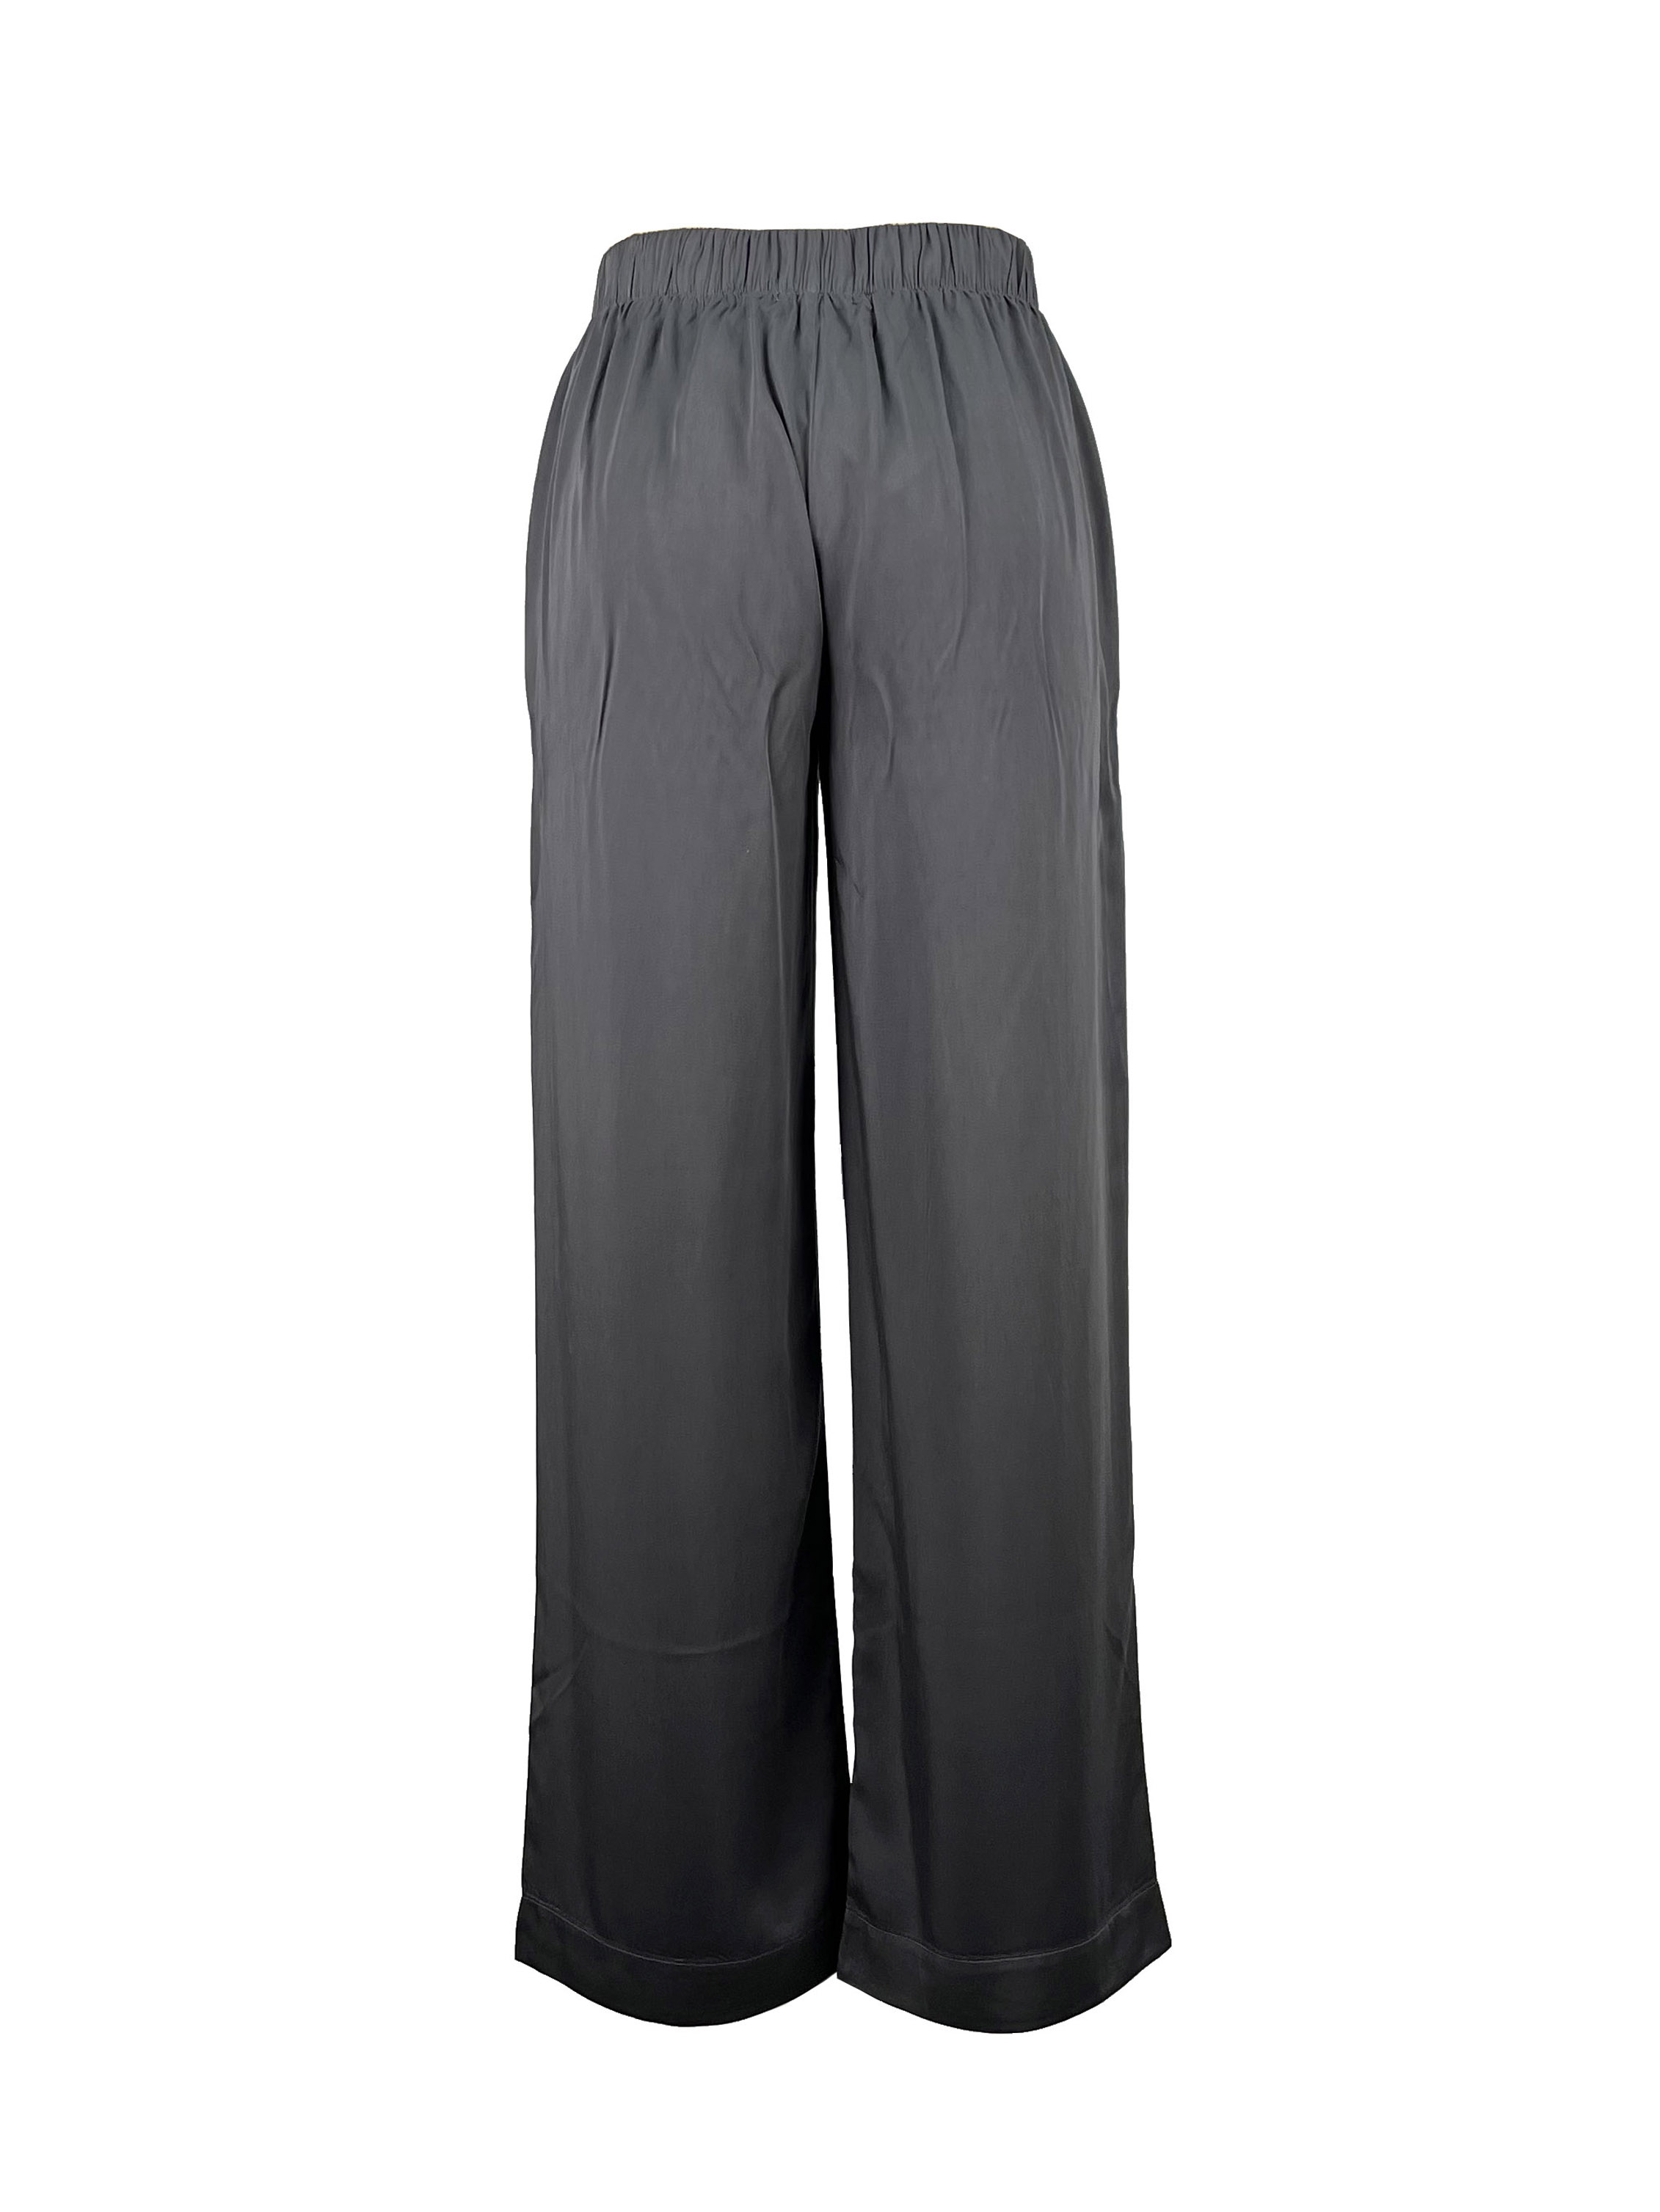 1.trousers (2)